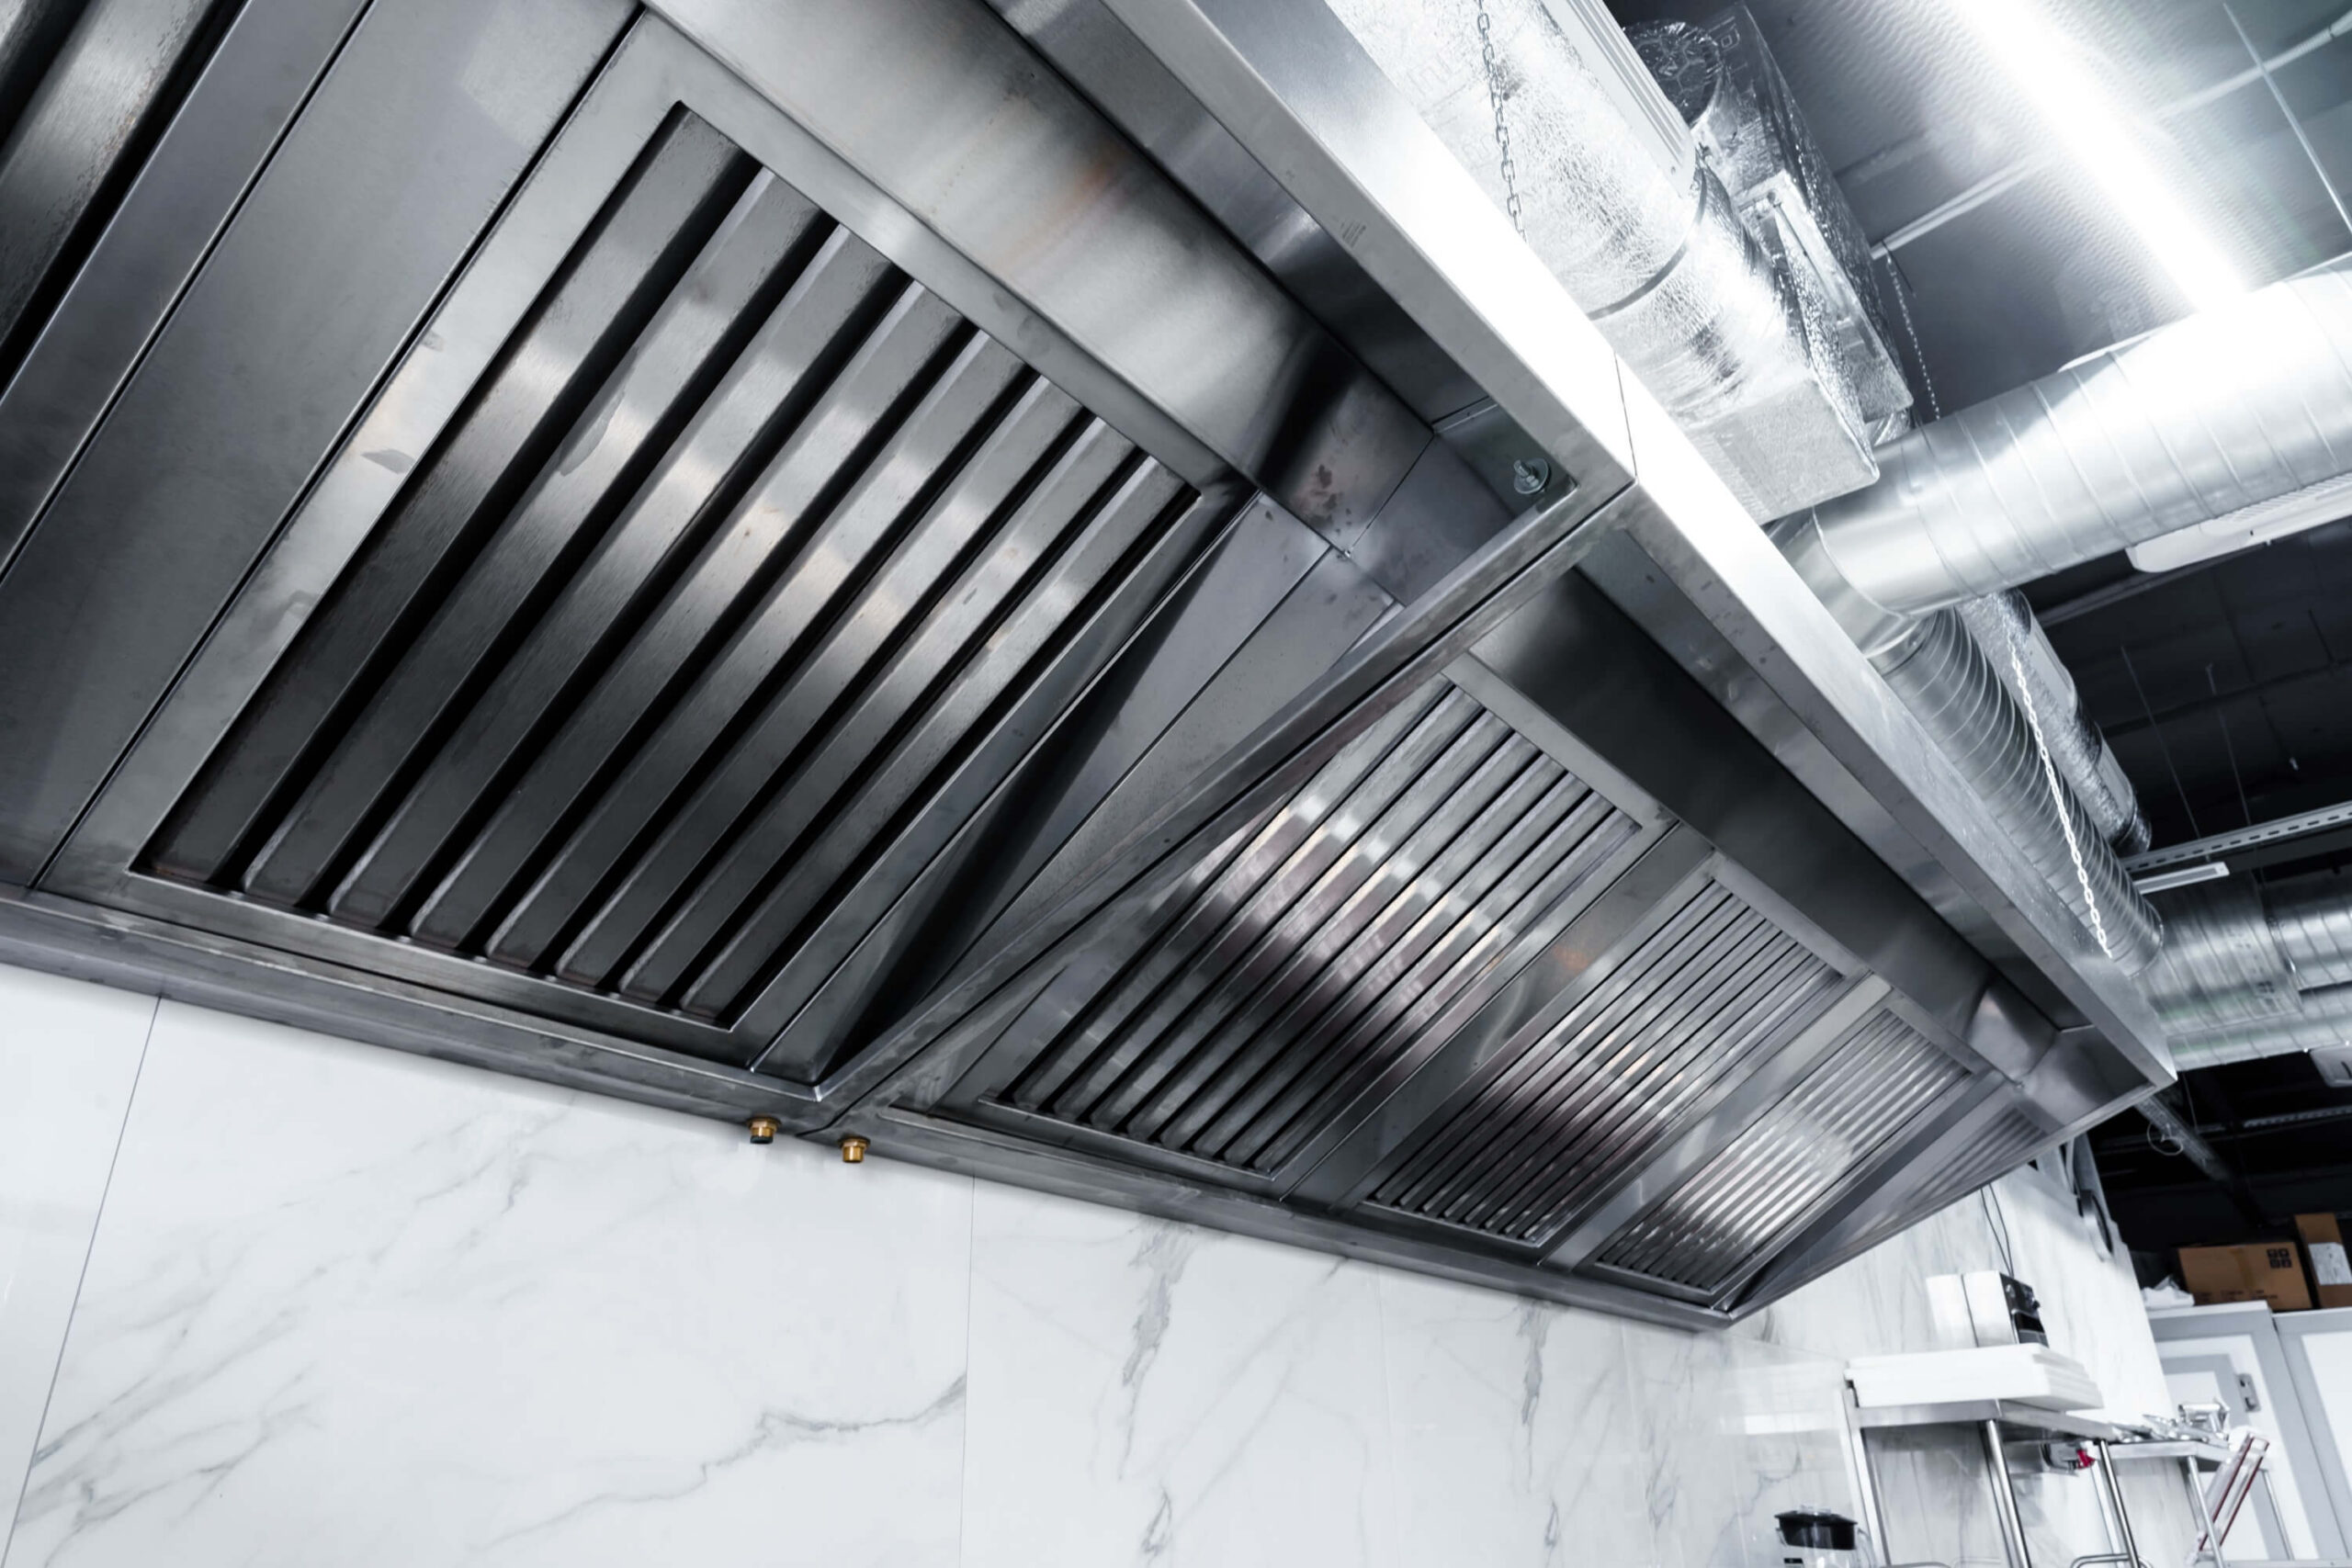 Exhaust Hood System In Commercial Kitchens